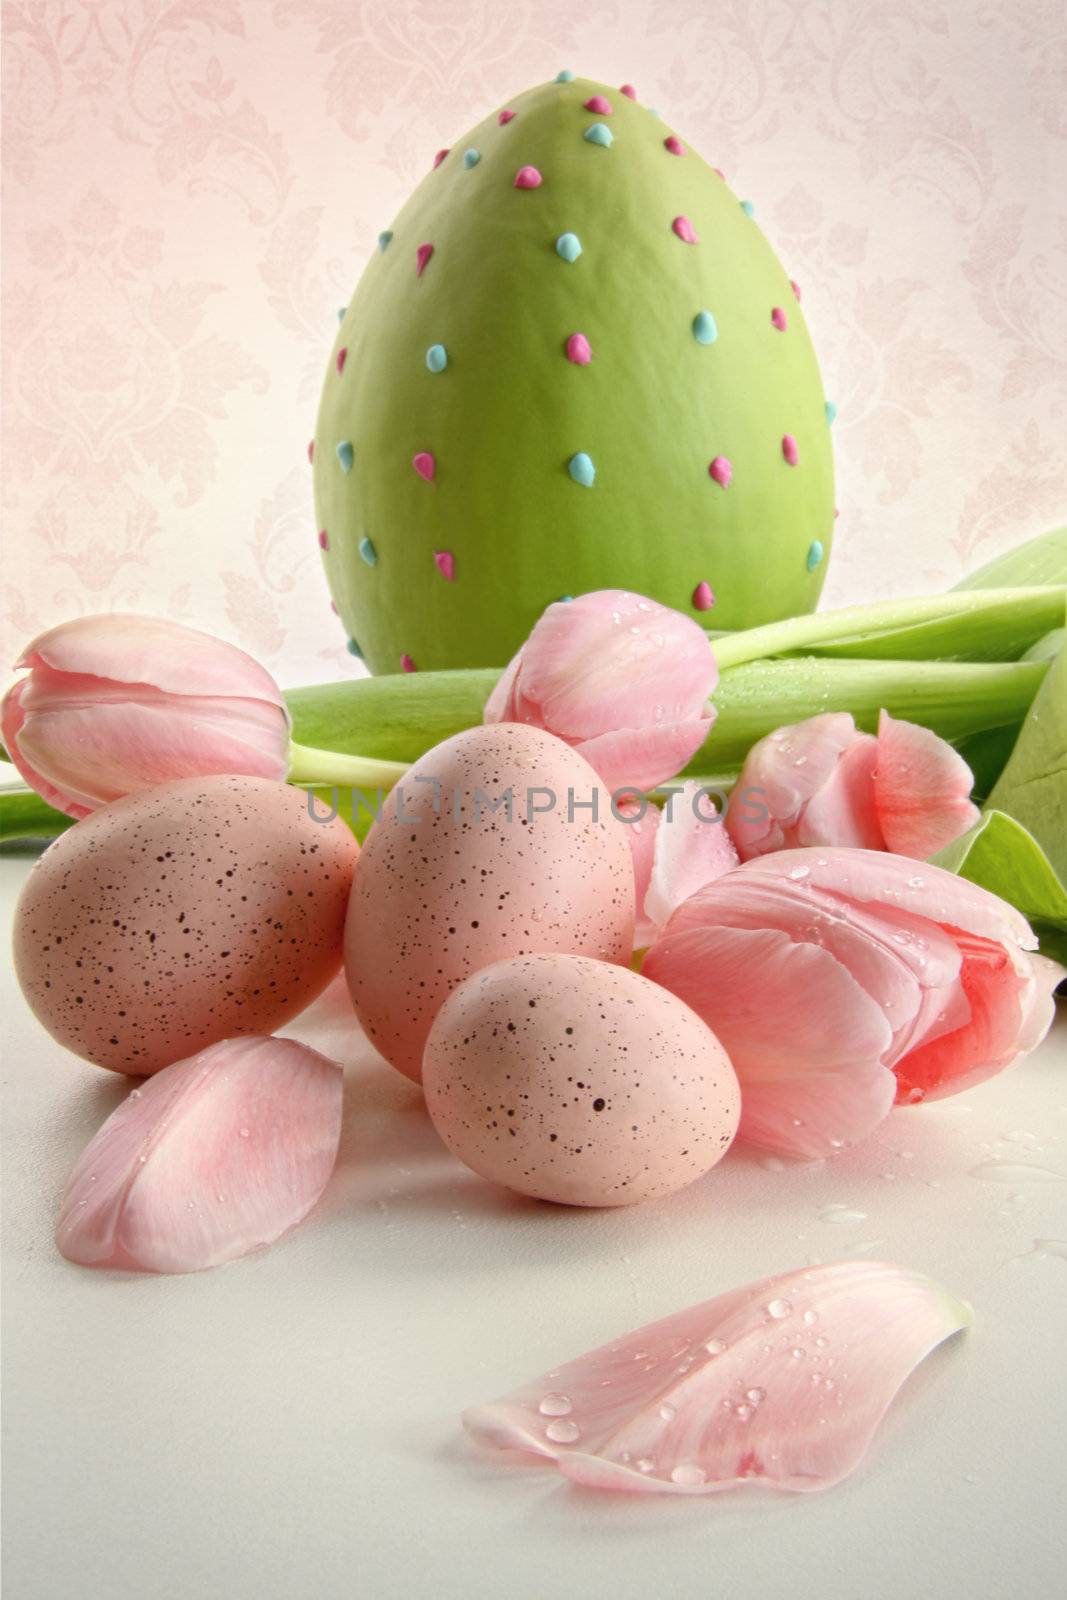 Easter egg and pink tulips with vintage feeling by Sandralise